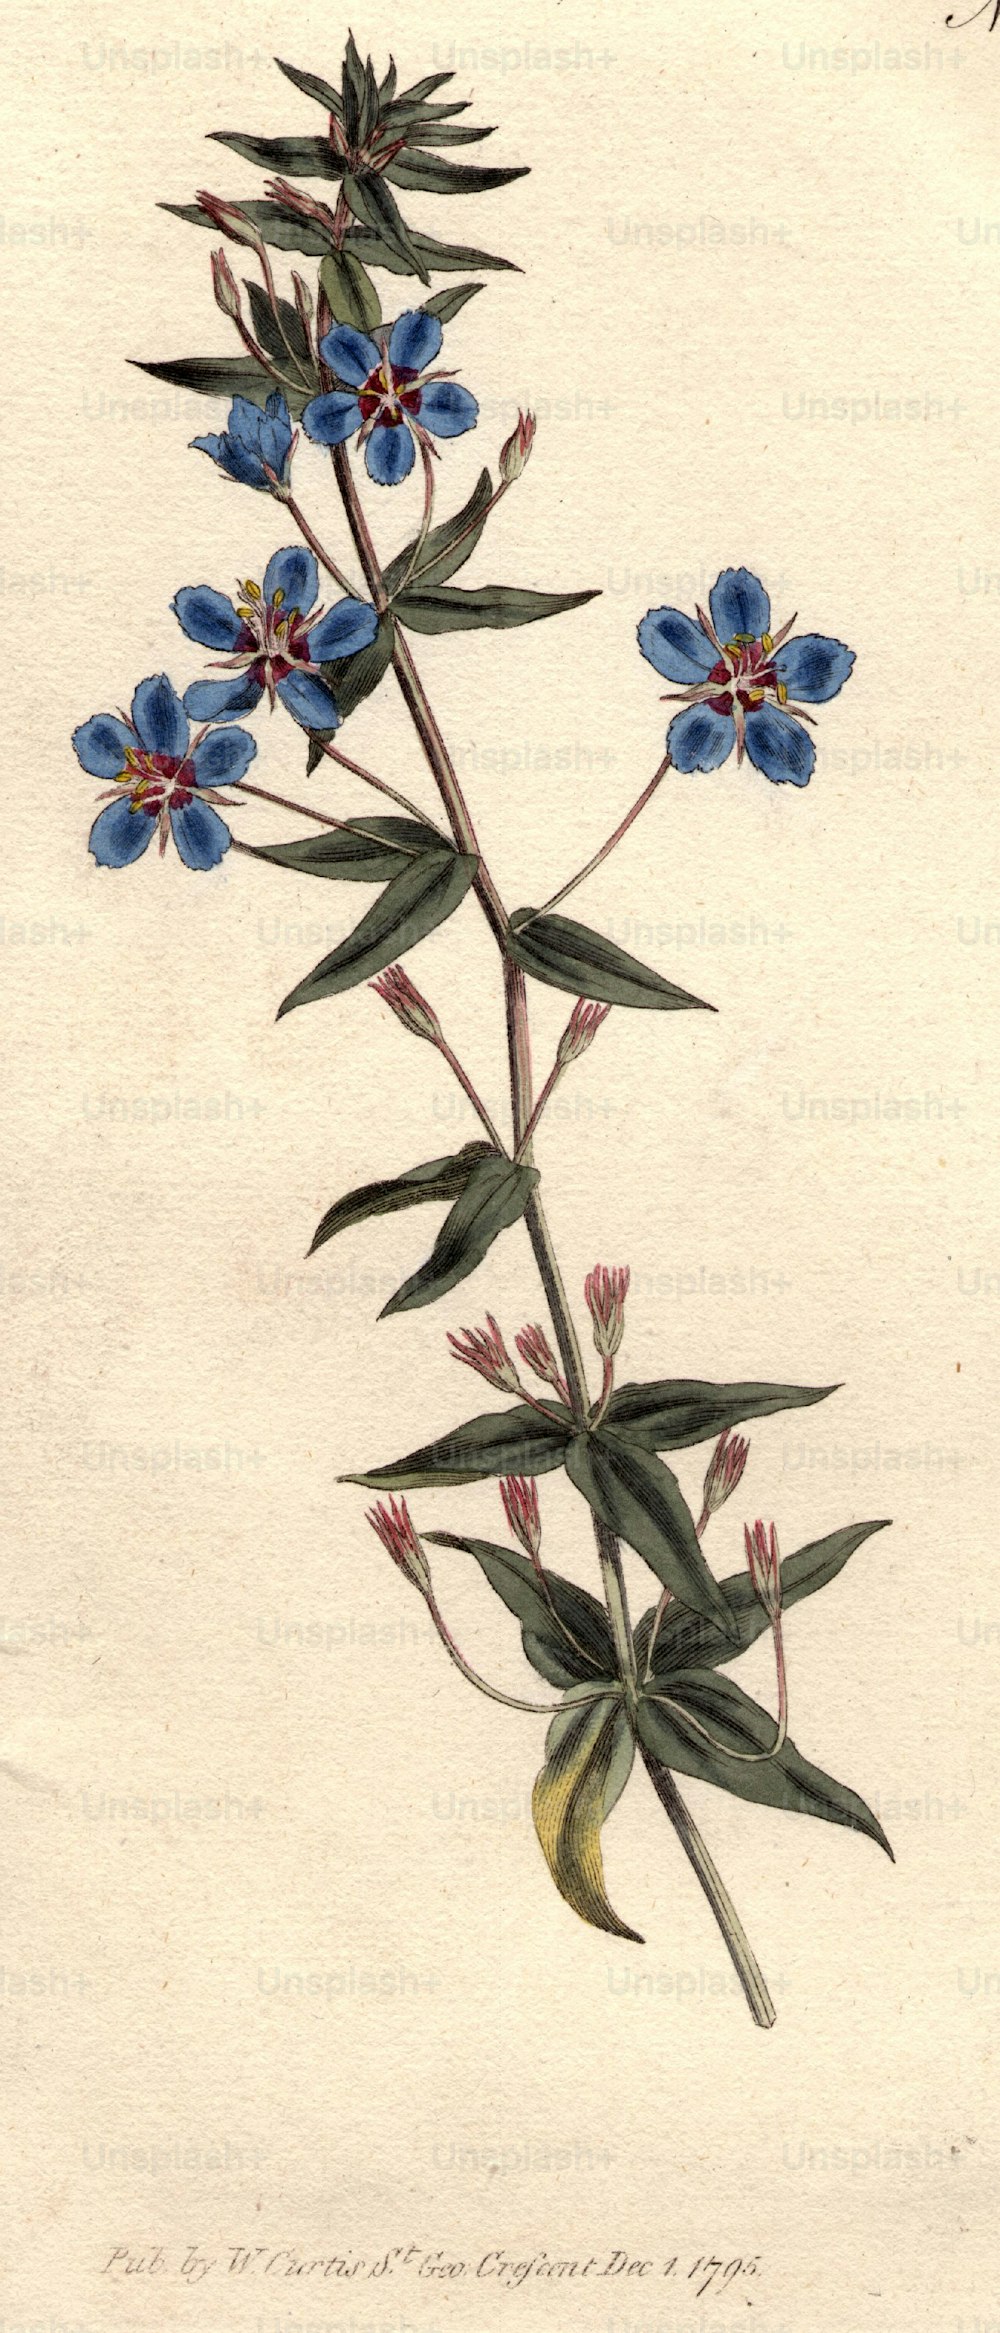 1st December 1796:  The Italian pimpernel.  Curtis' Botanical Magazine - pub. 1796  (Photo by Hulton Archive/Getty Images)